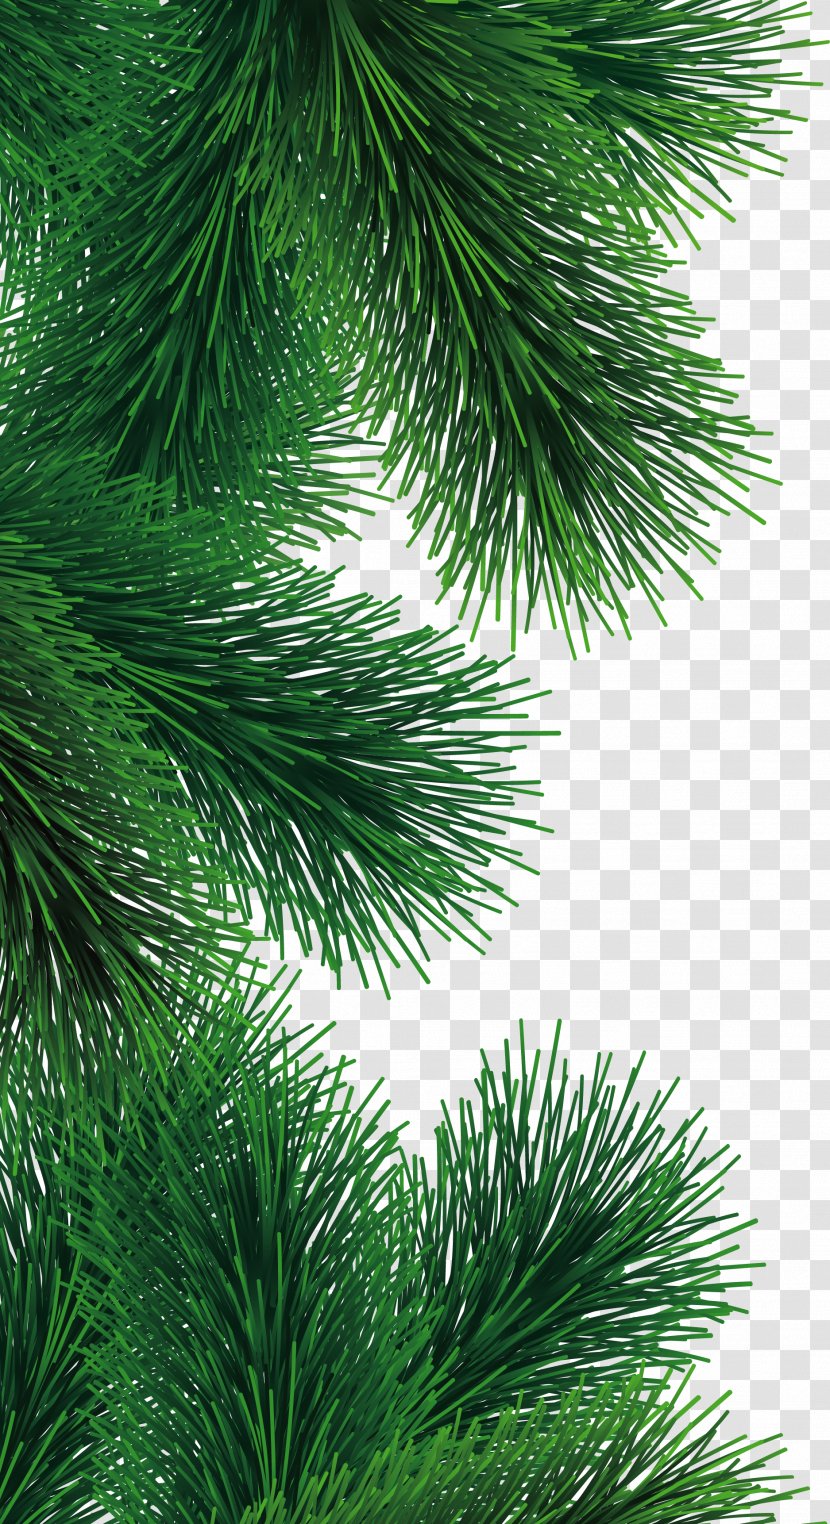 Pine Christmas Tree - Larch - Fir-tree Branch Image Transparent PNG